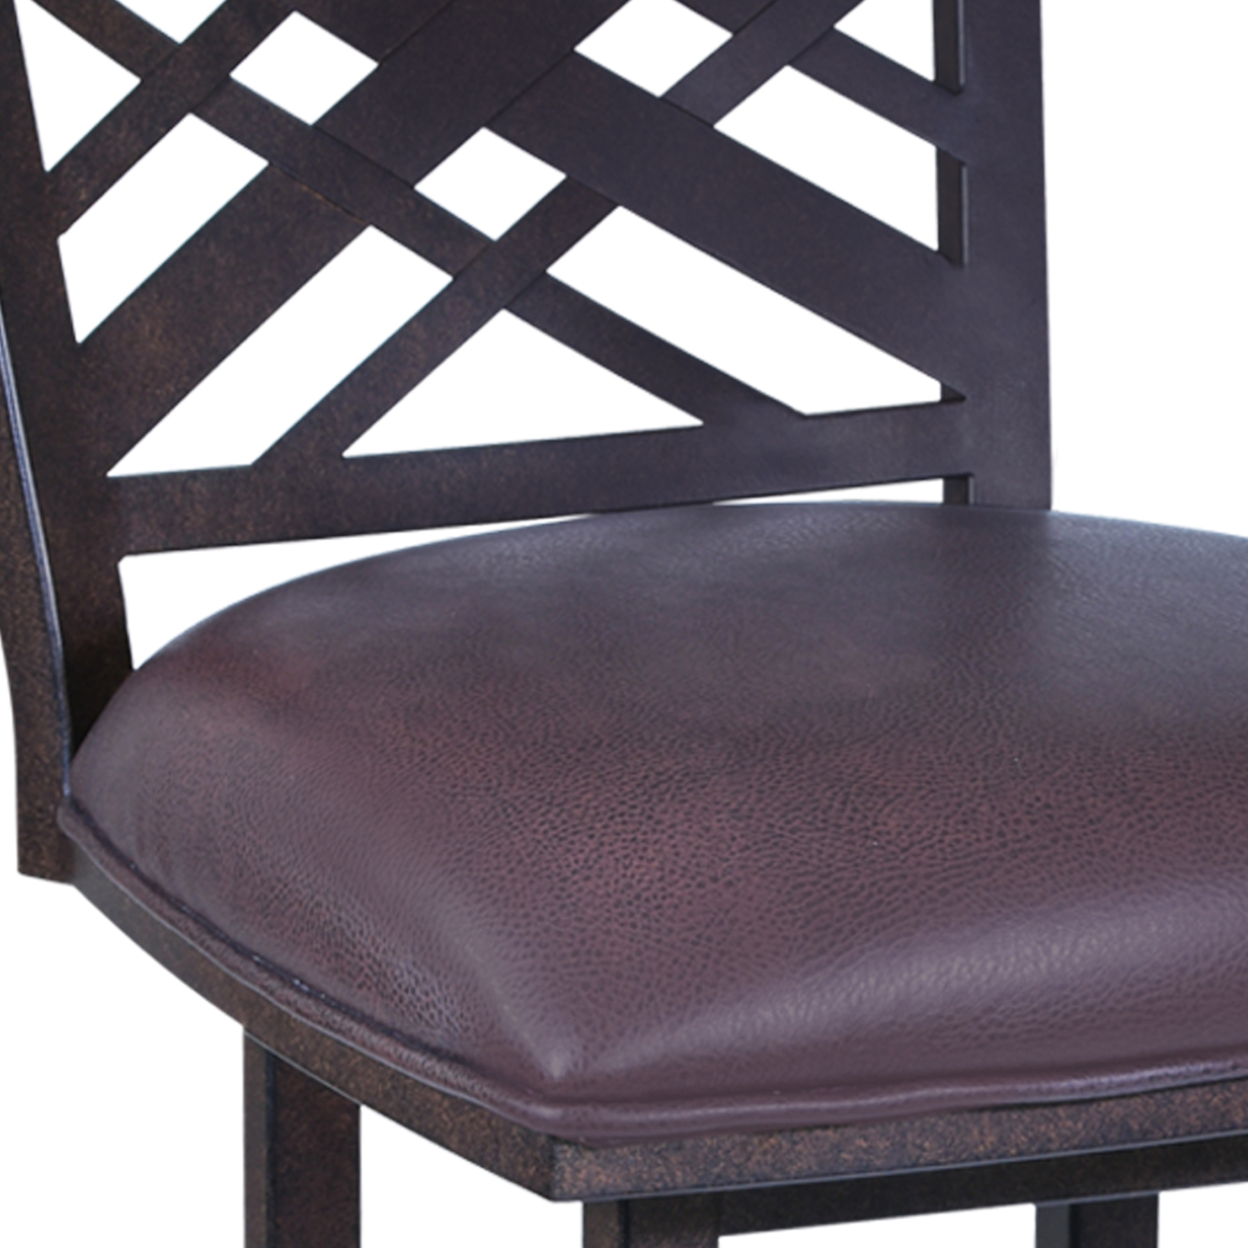 30 Inch Metal Bar Stool With Leatherette Seat And Swivel Mechanism, Brown- Saltoro Sherpi